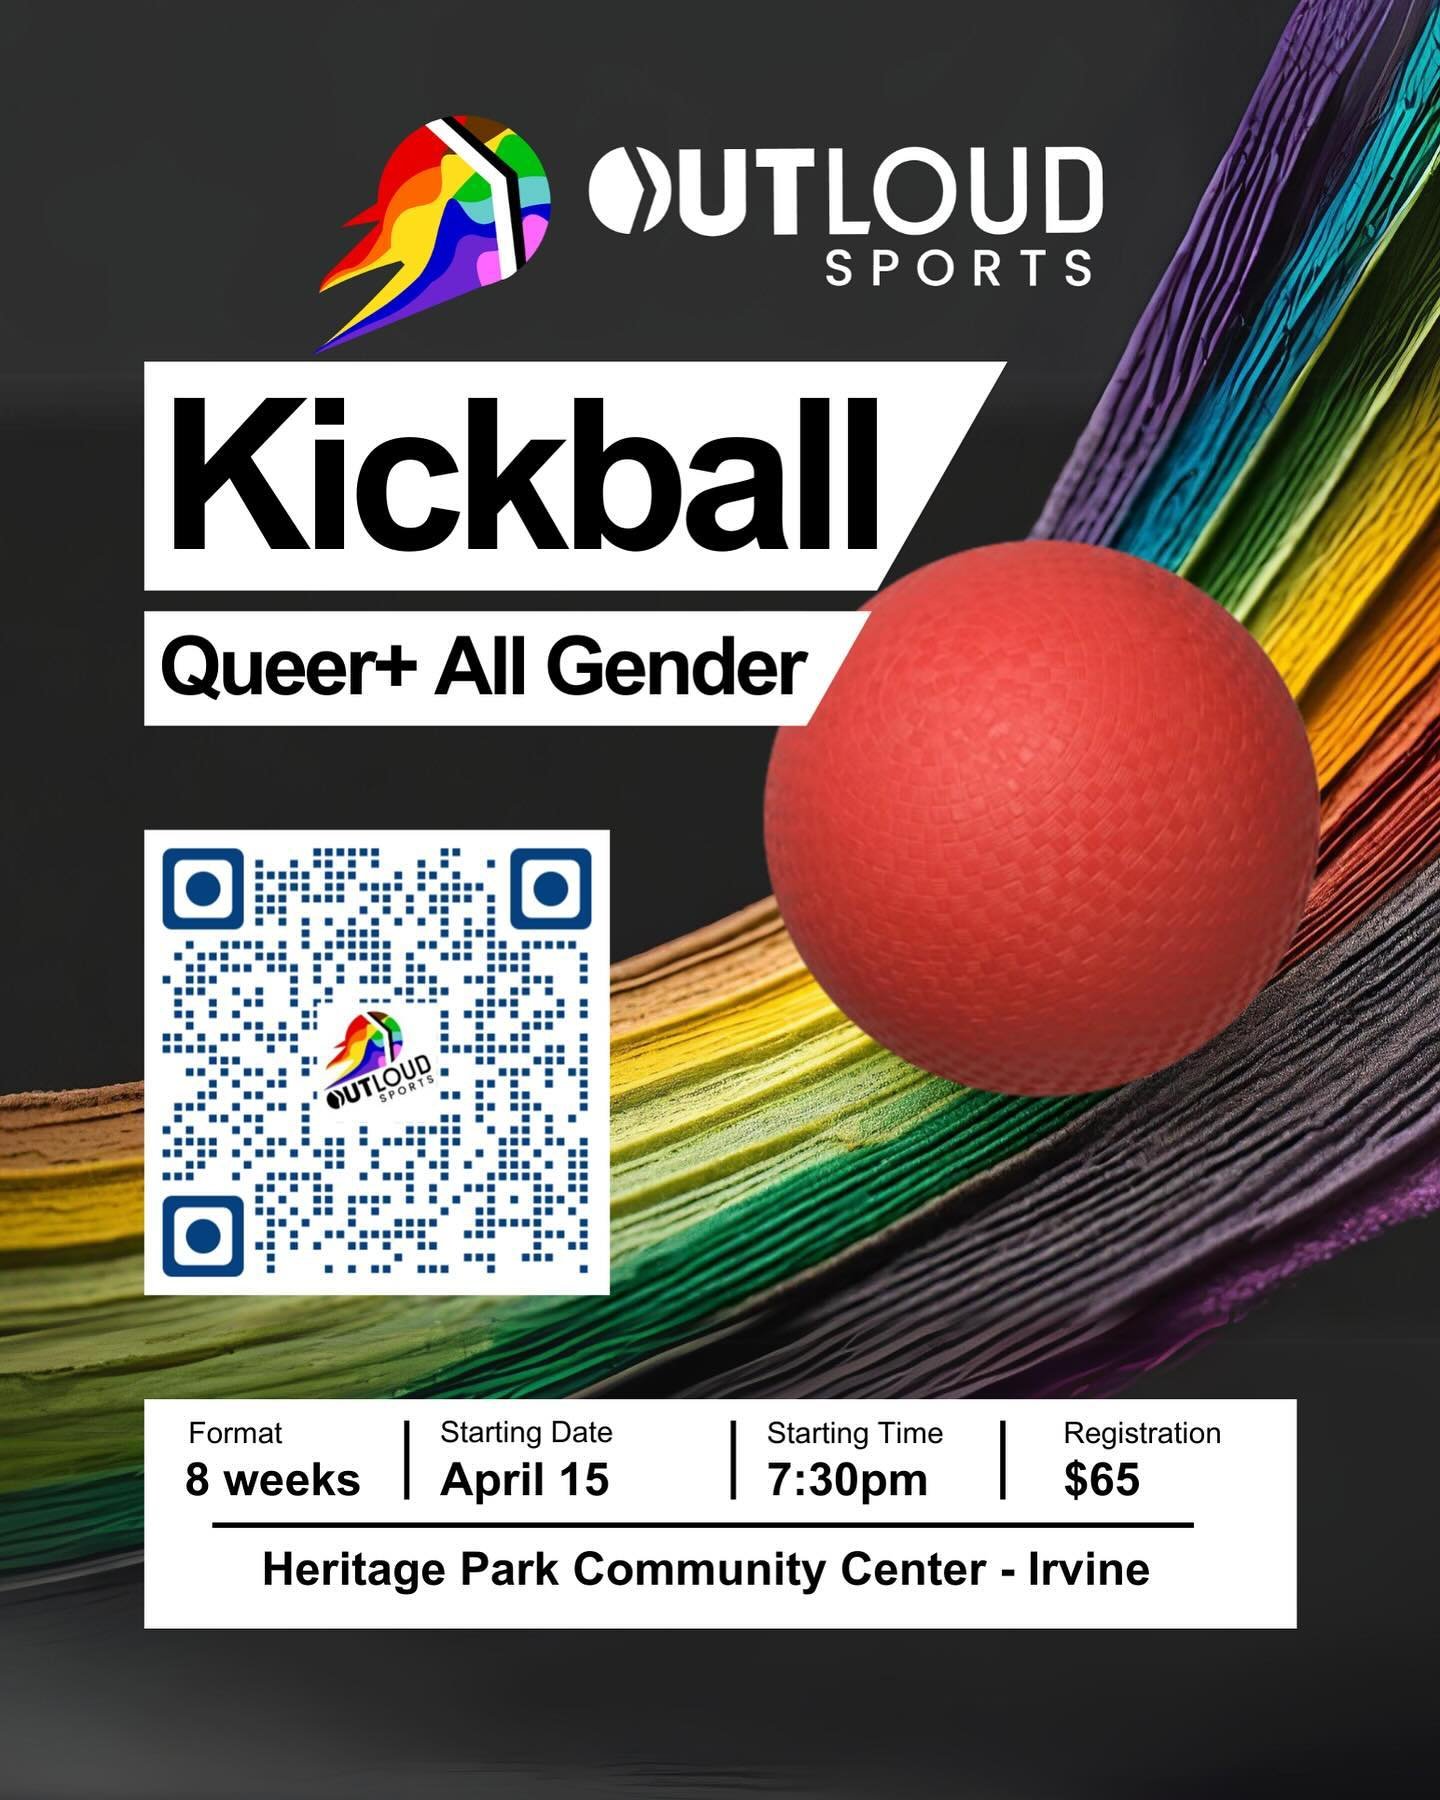 OC&rsquo;s first kickball league is coming your way in Irvine at Heritage Park! We have a free open play in early April and then we&rsquo;ll have an all skills 8 week league following! Sigh up today https://outloudoc.leagueapps.com/leagues #outloudsp